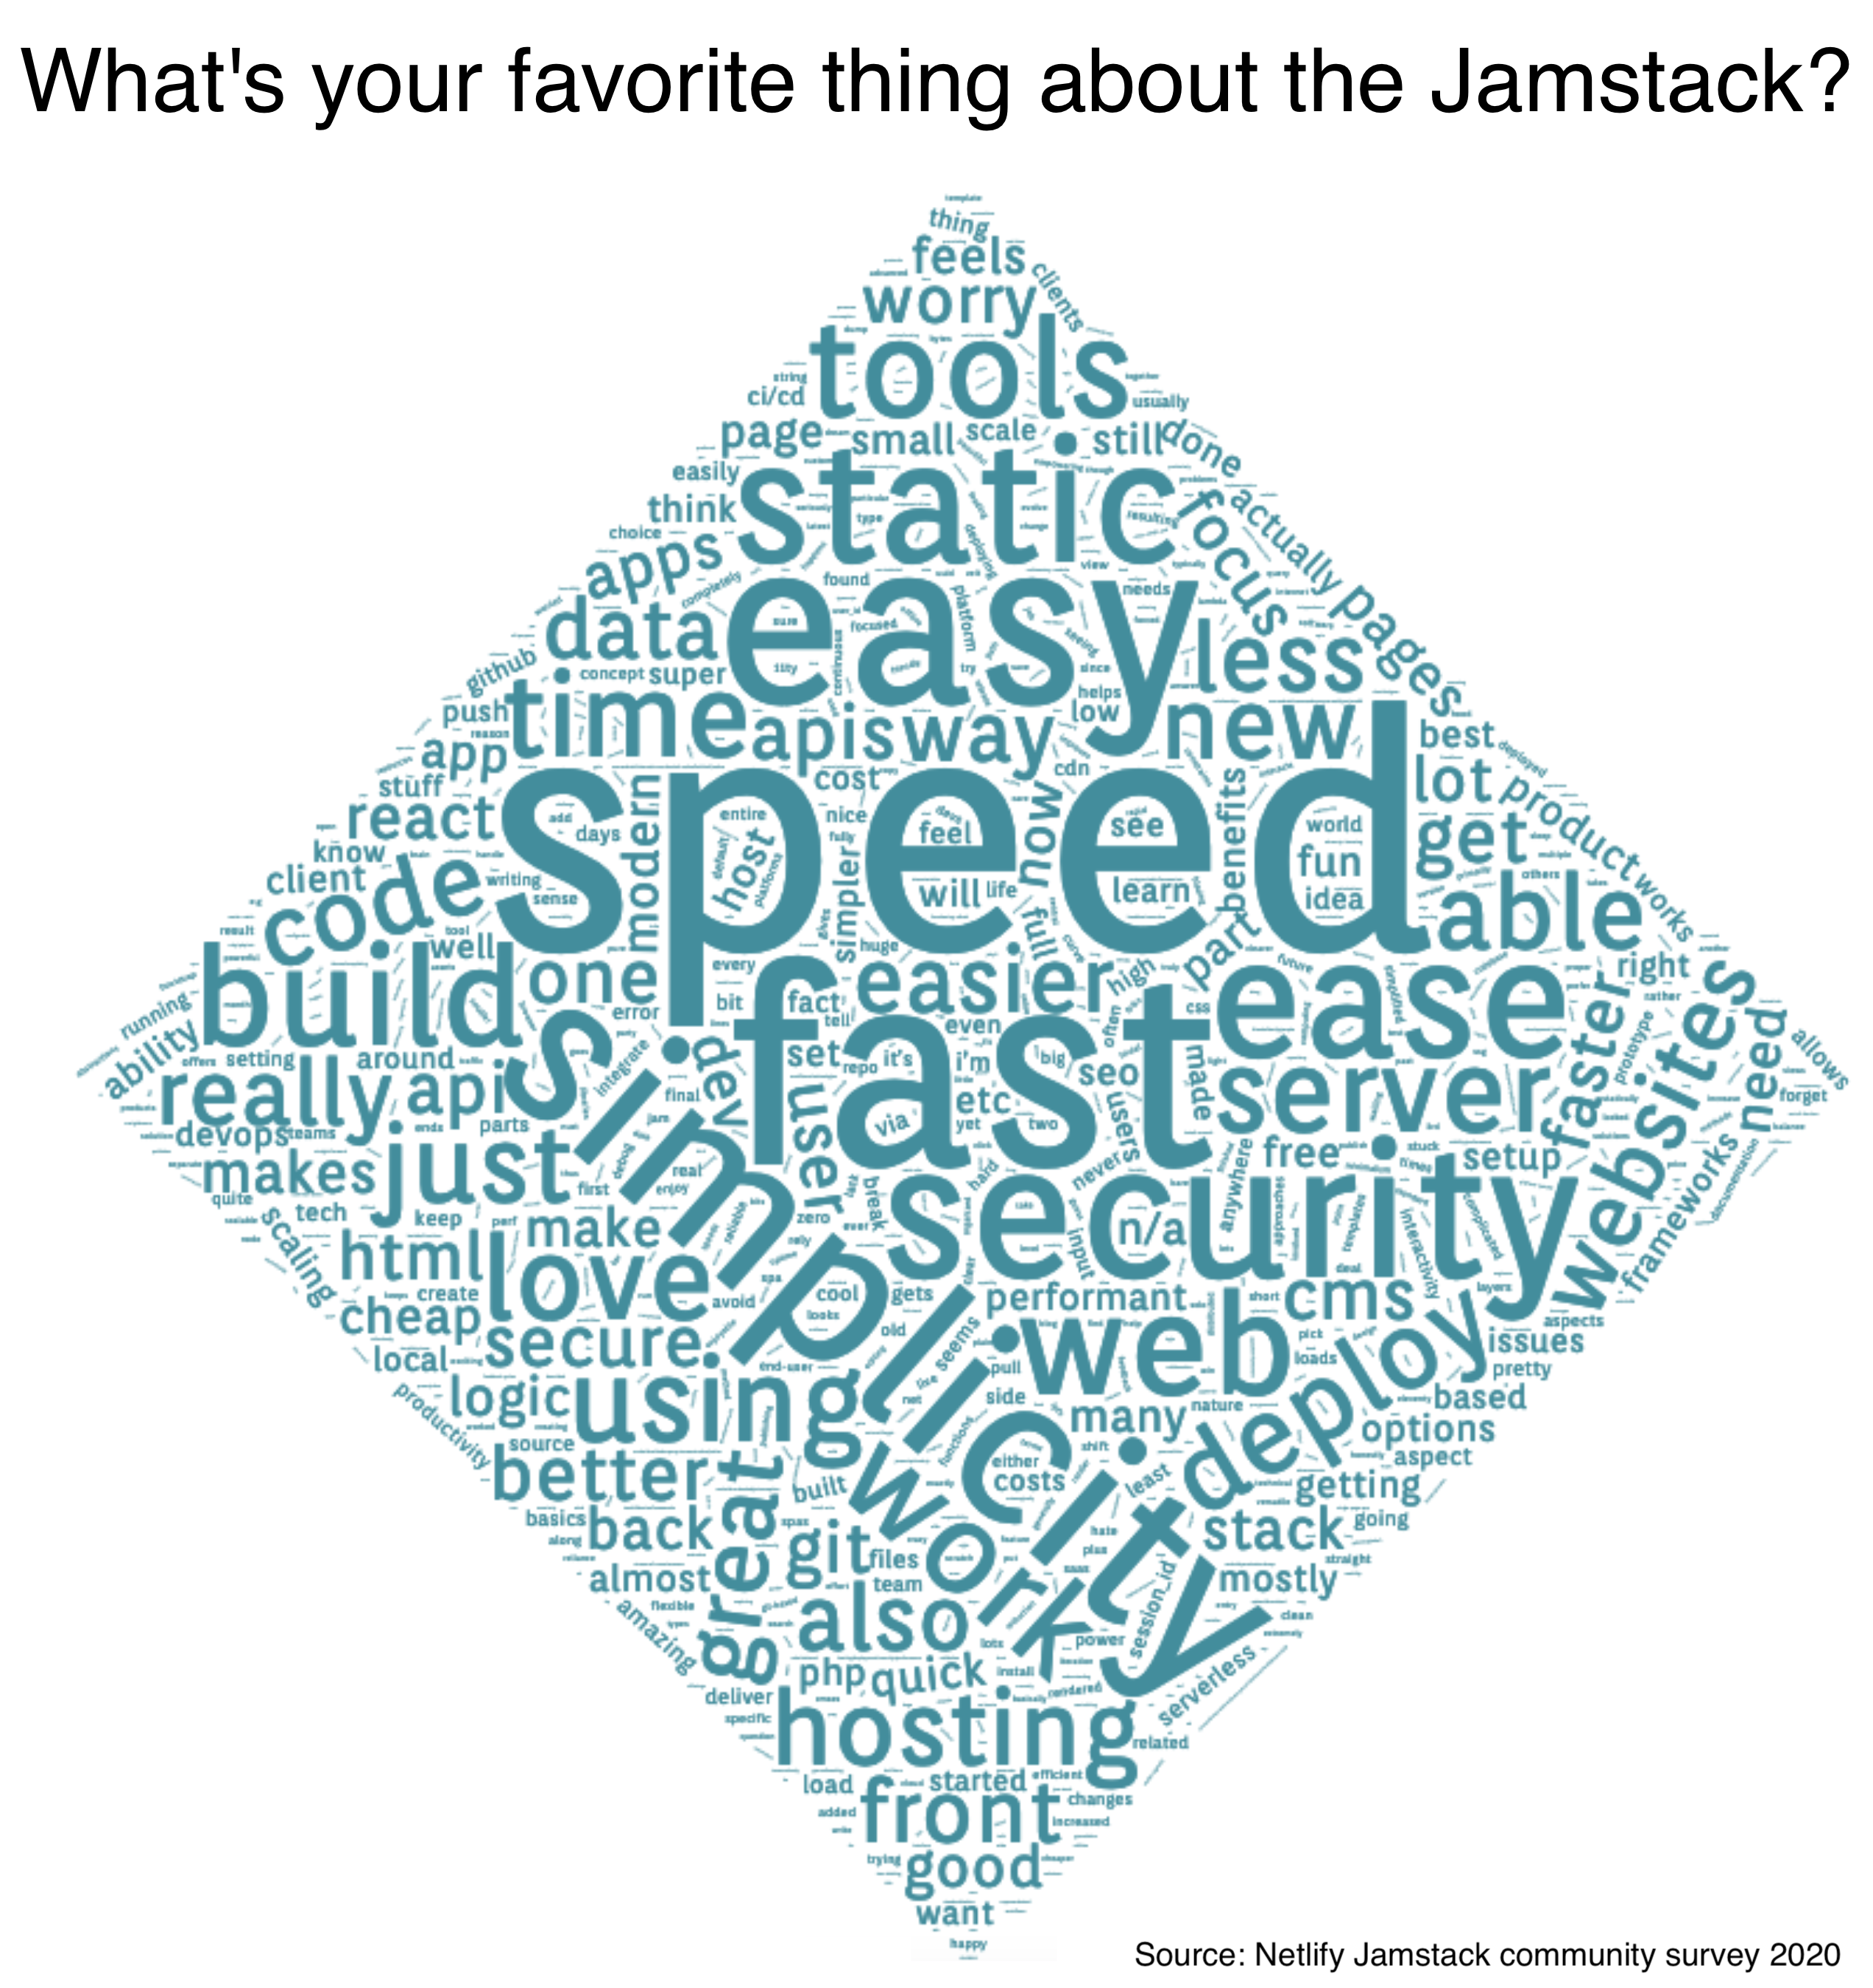 A decorative word cloud of text in response to the question "what's your favorite thing about the Jamstack?" Largest words include: speed, easy, fast, simple, static, tools, web, security, deploy, "really just love using".